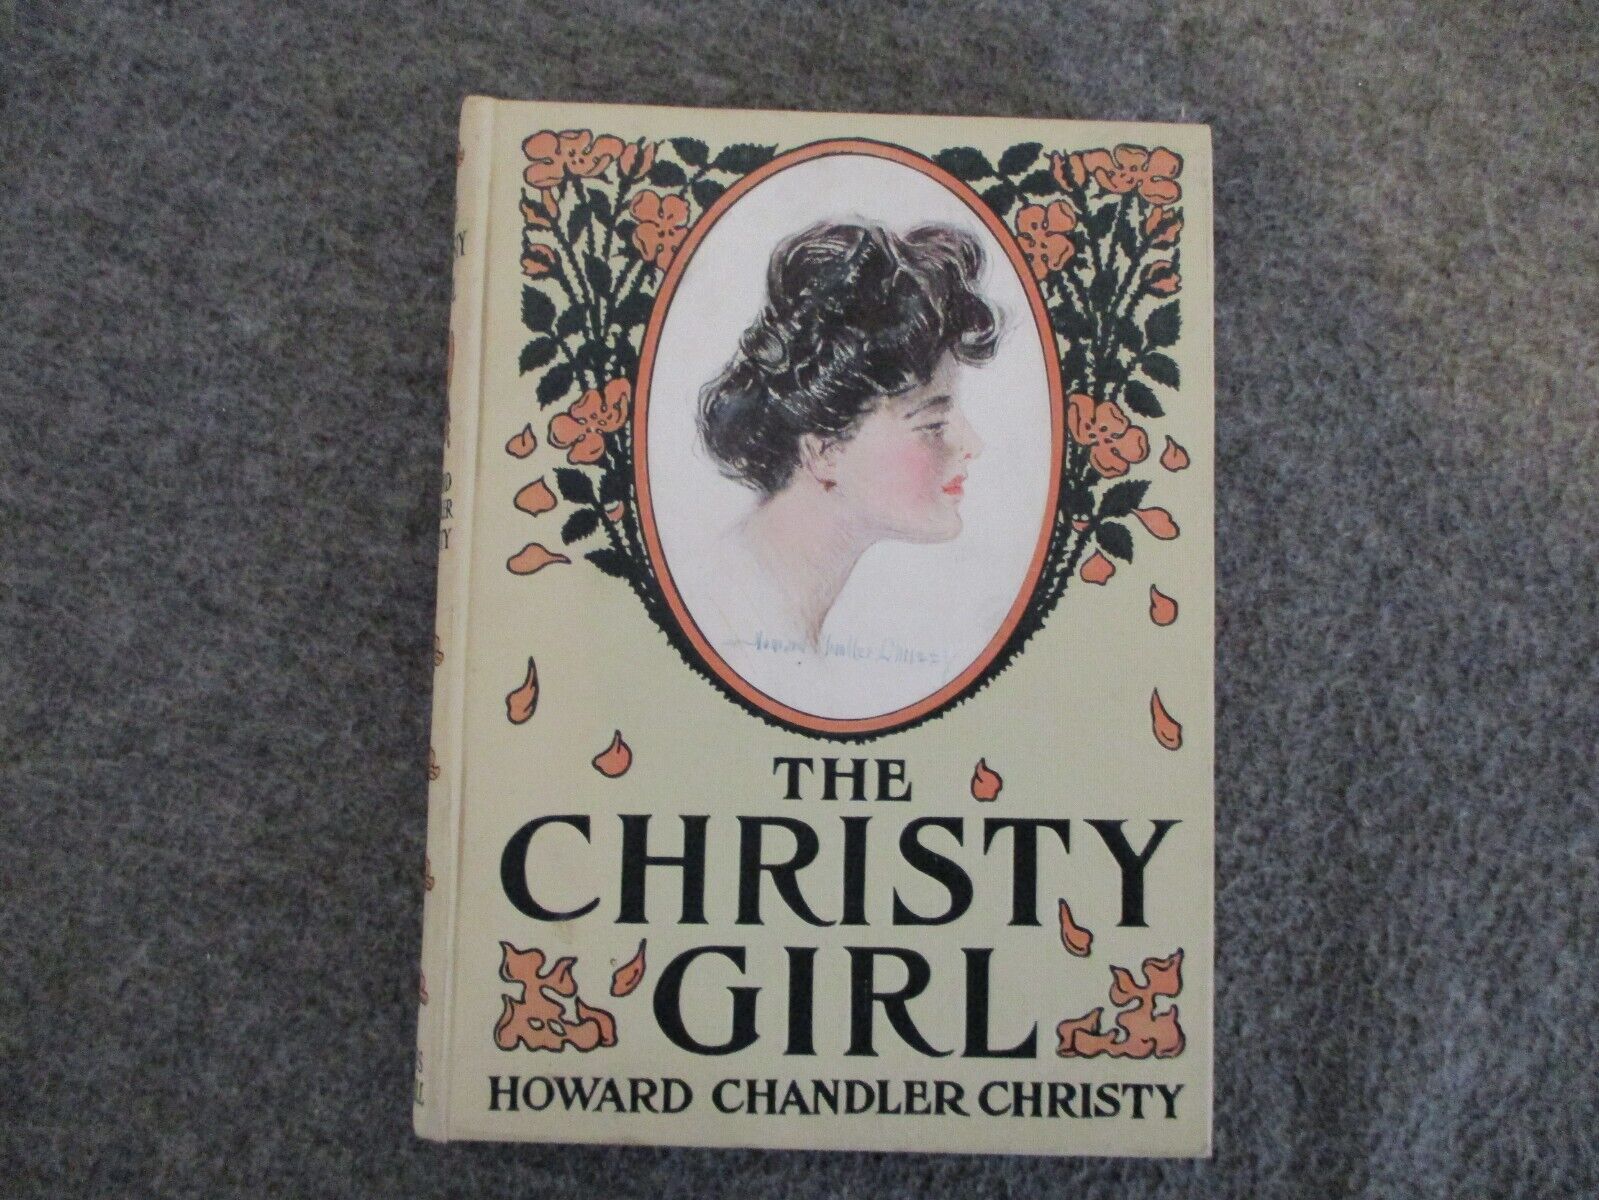 1906 THE CHRISTY GIRL, HOWARD CHANDLER CHRISTY, FIRST EDITION